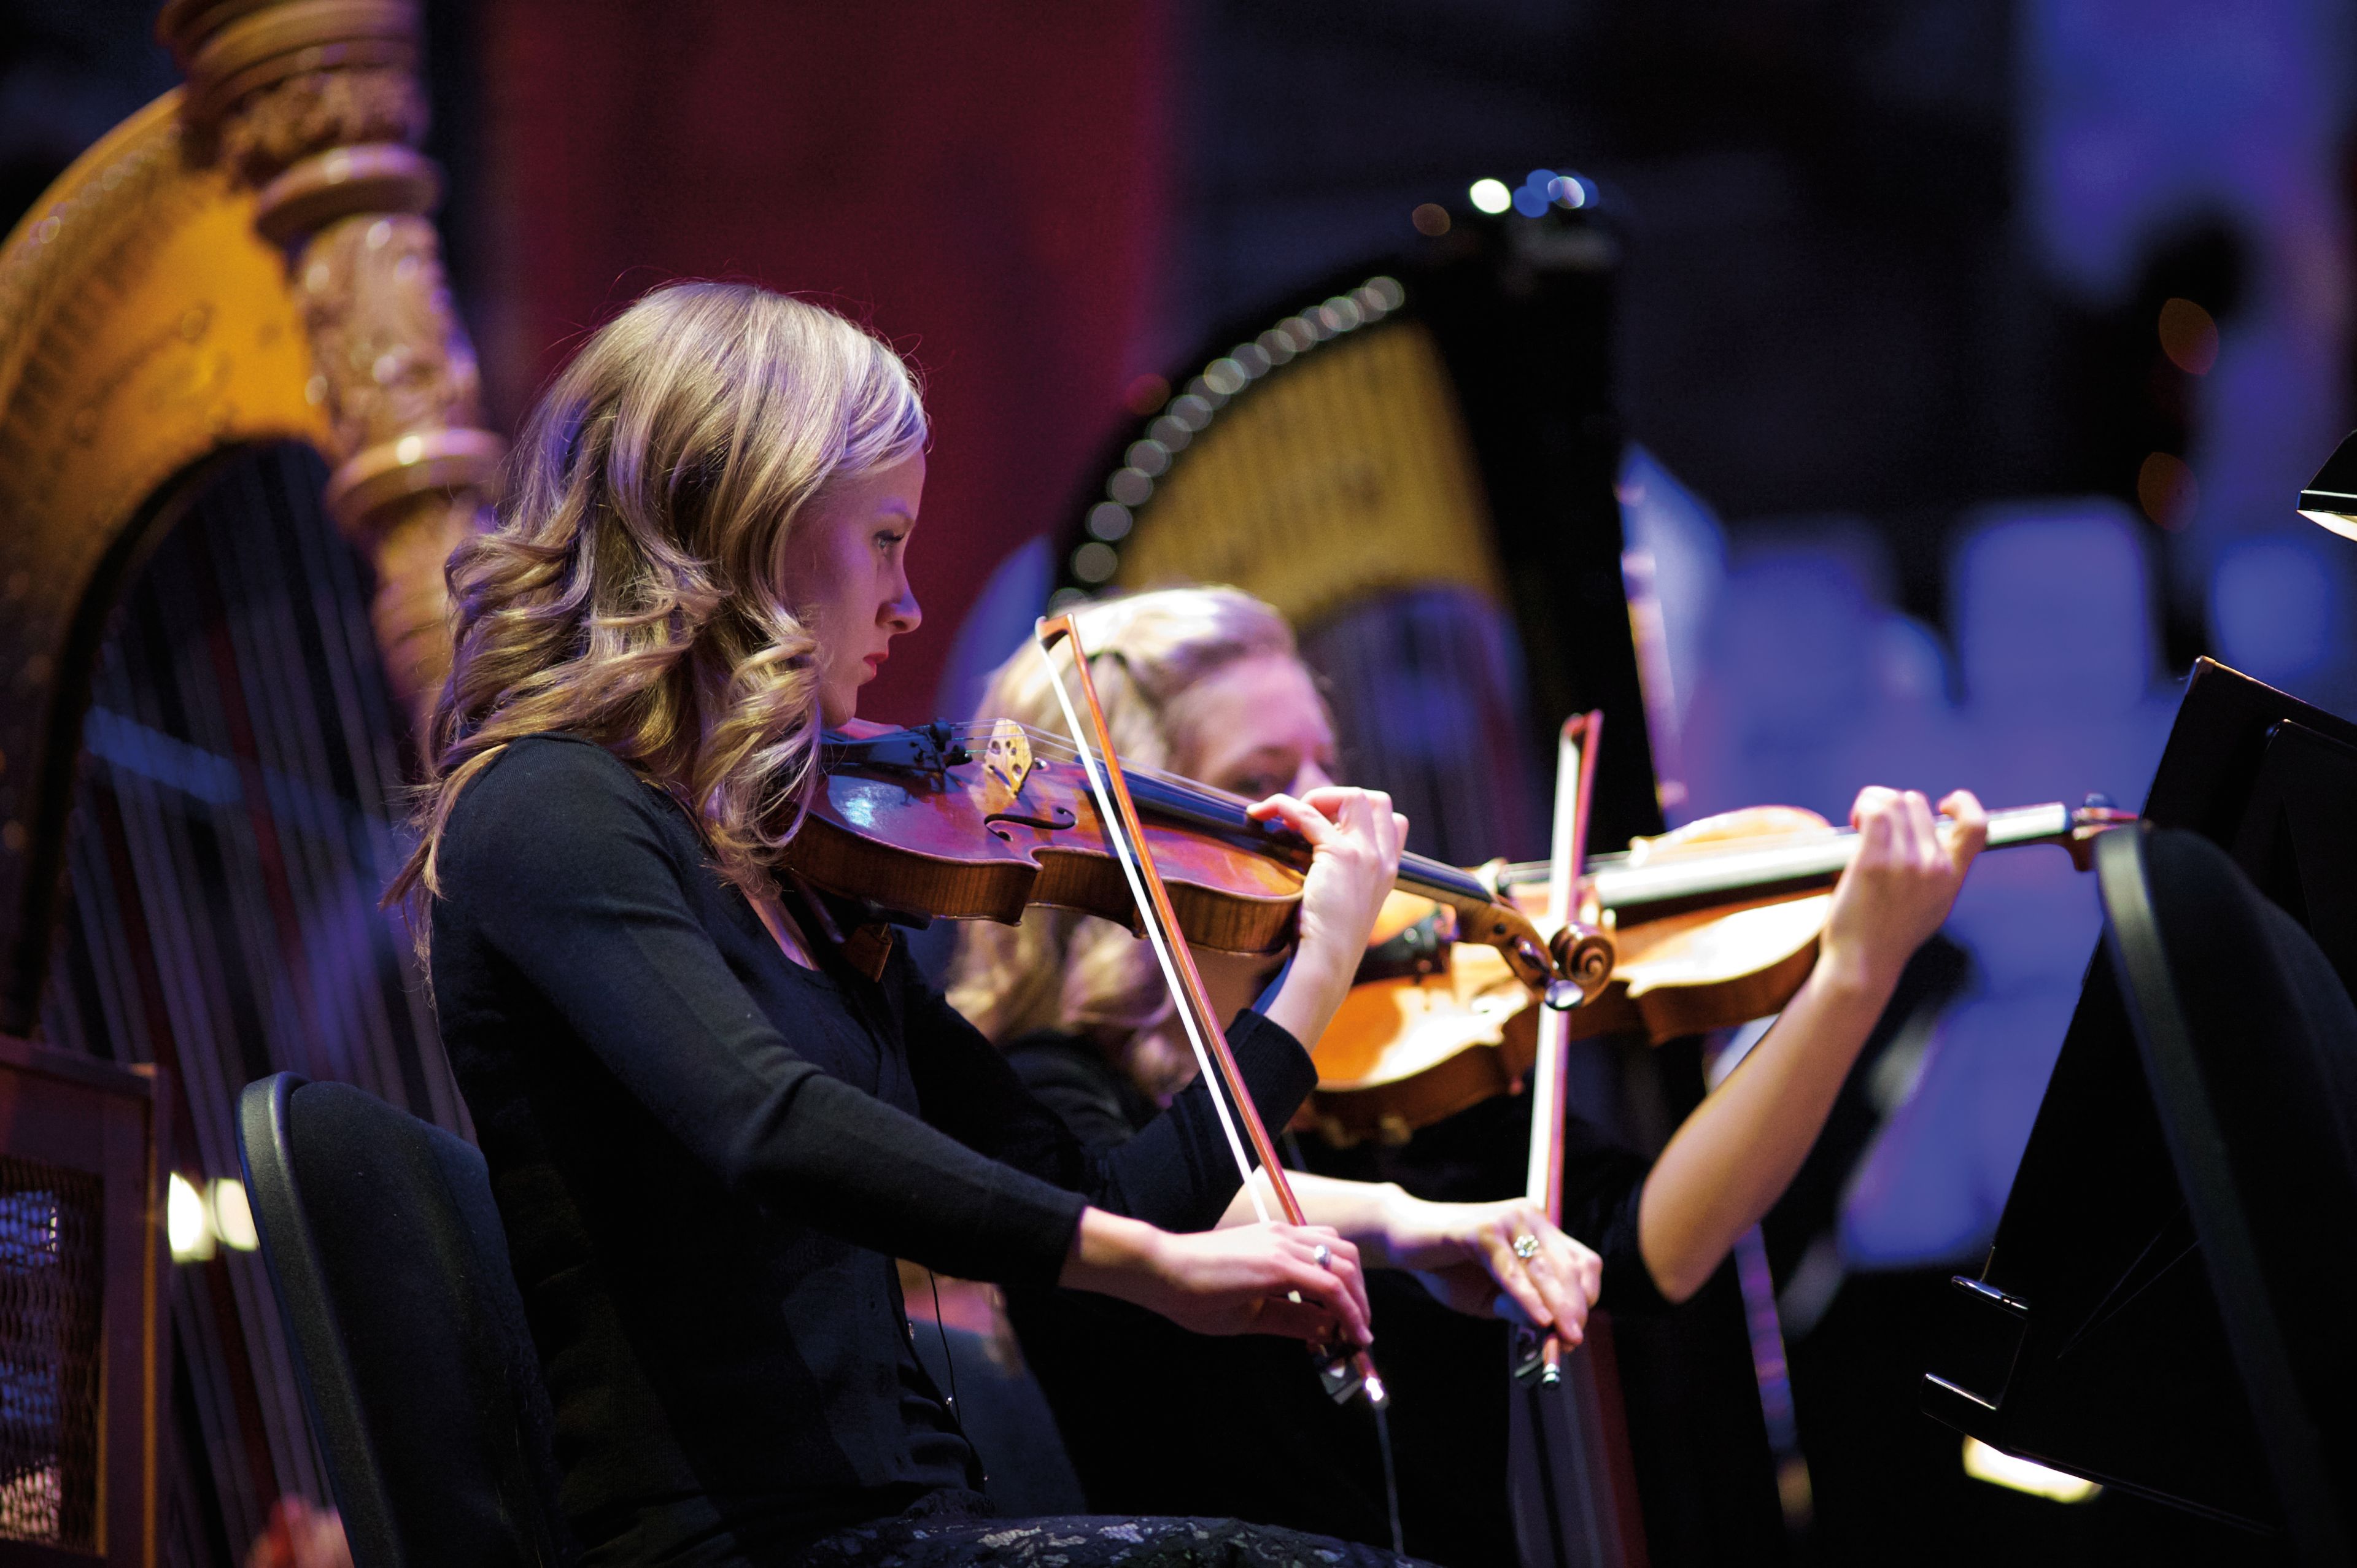 A woman playing in the orchestra next to another woman in the 2011 Christmas concert.